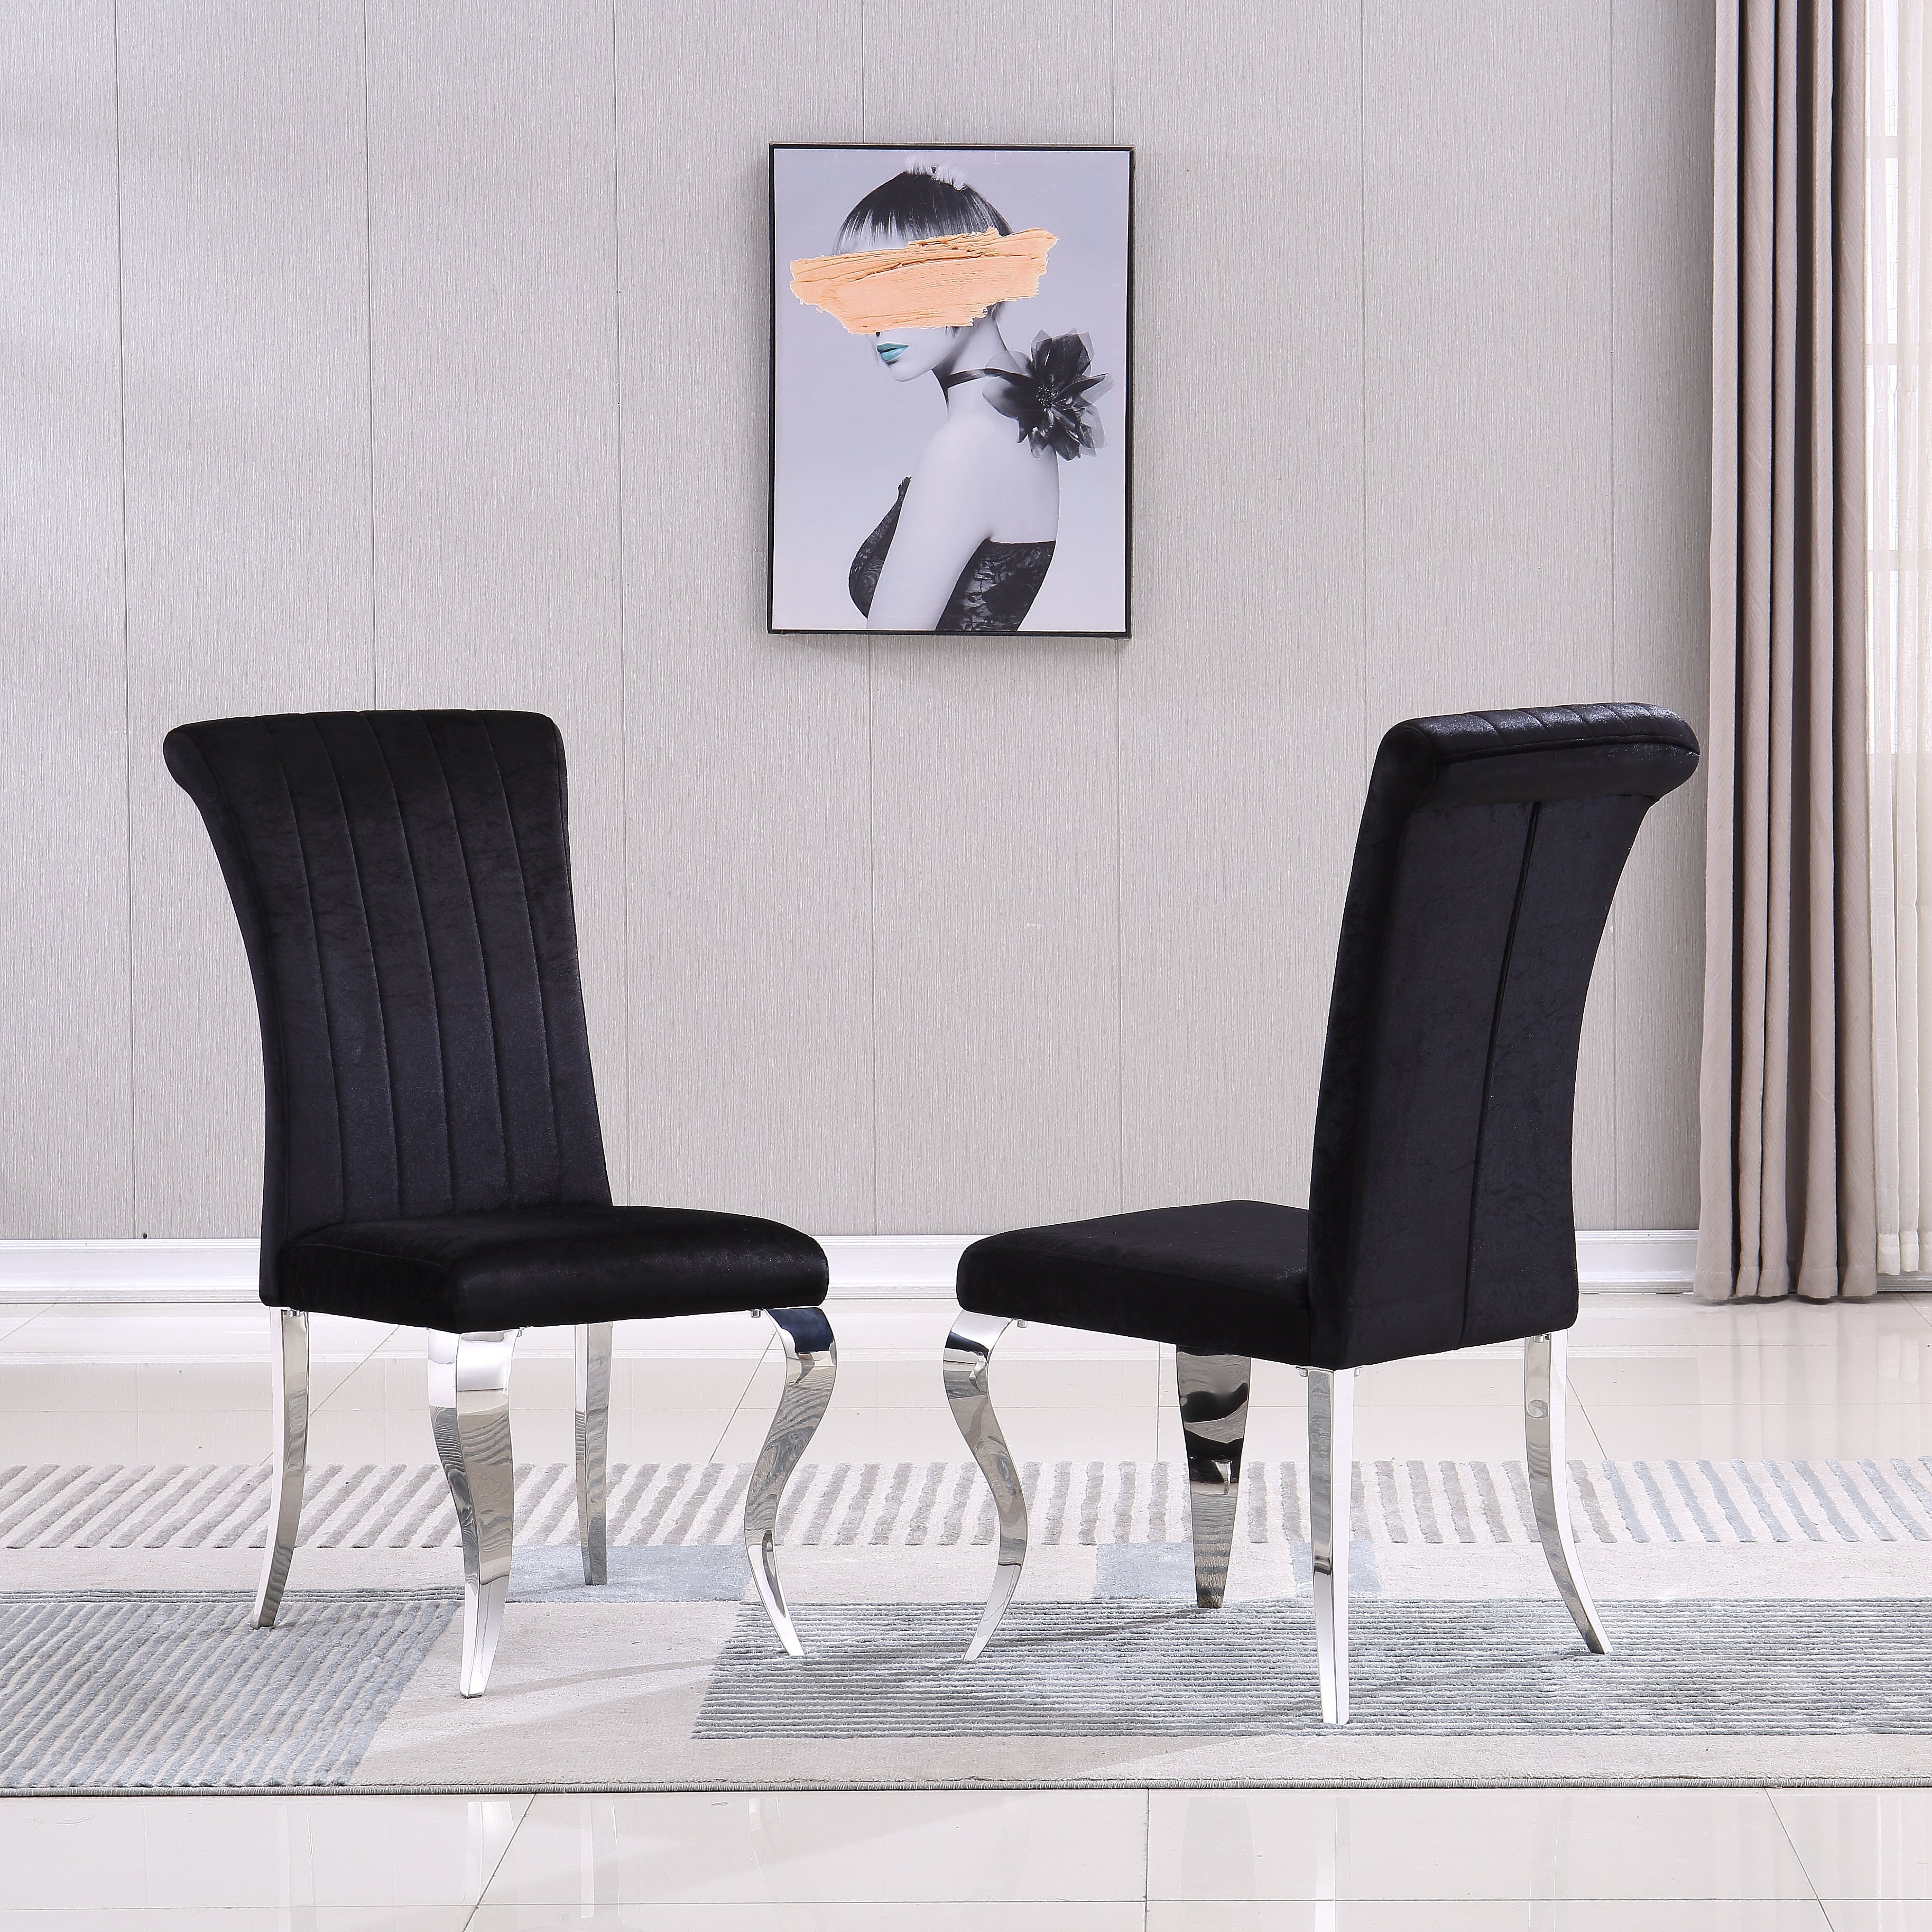 Faaria Dining Chair Black Silver Set of 2